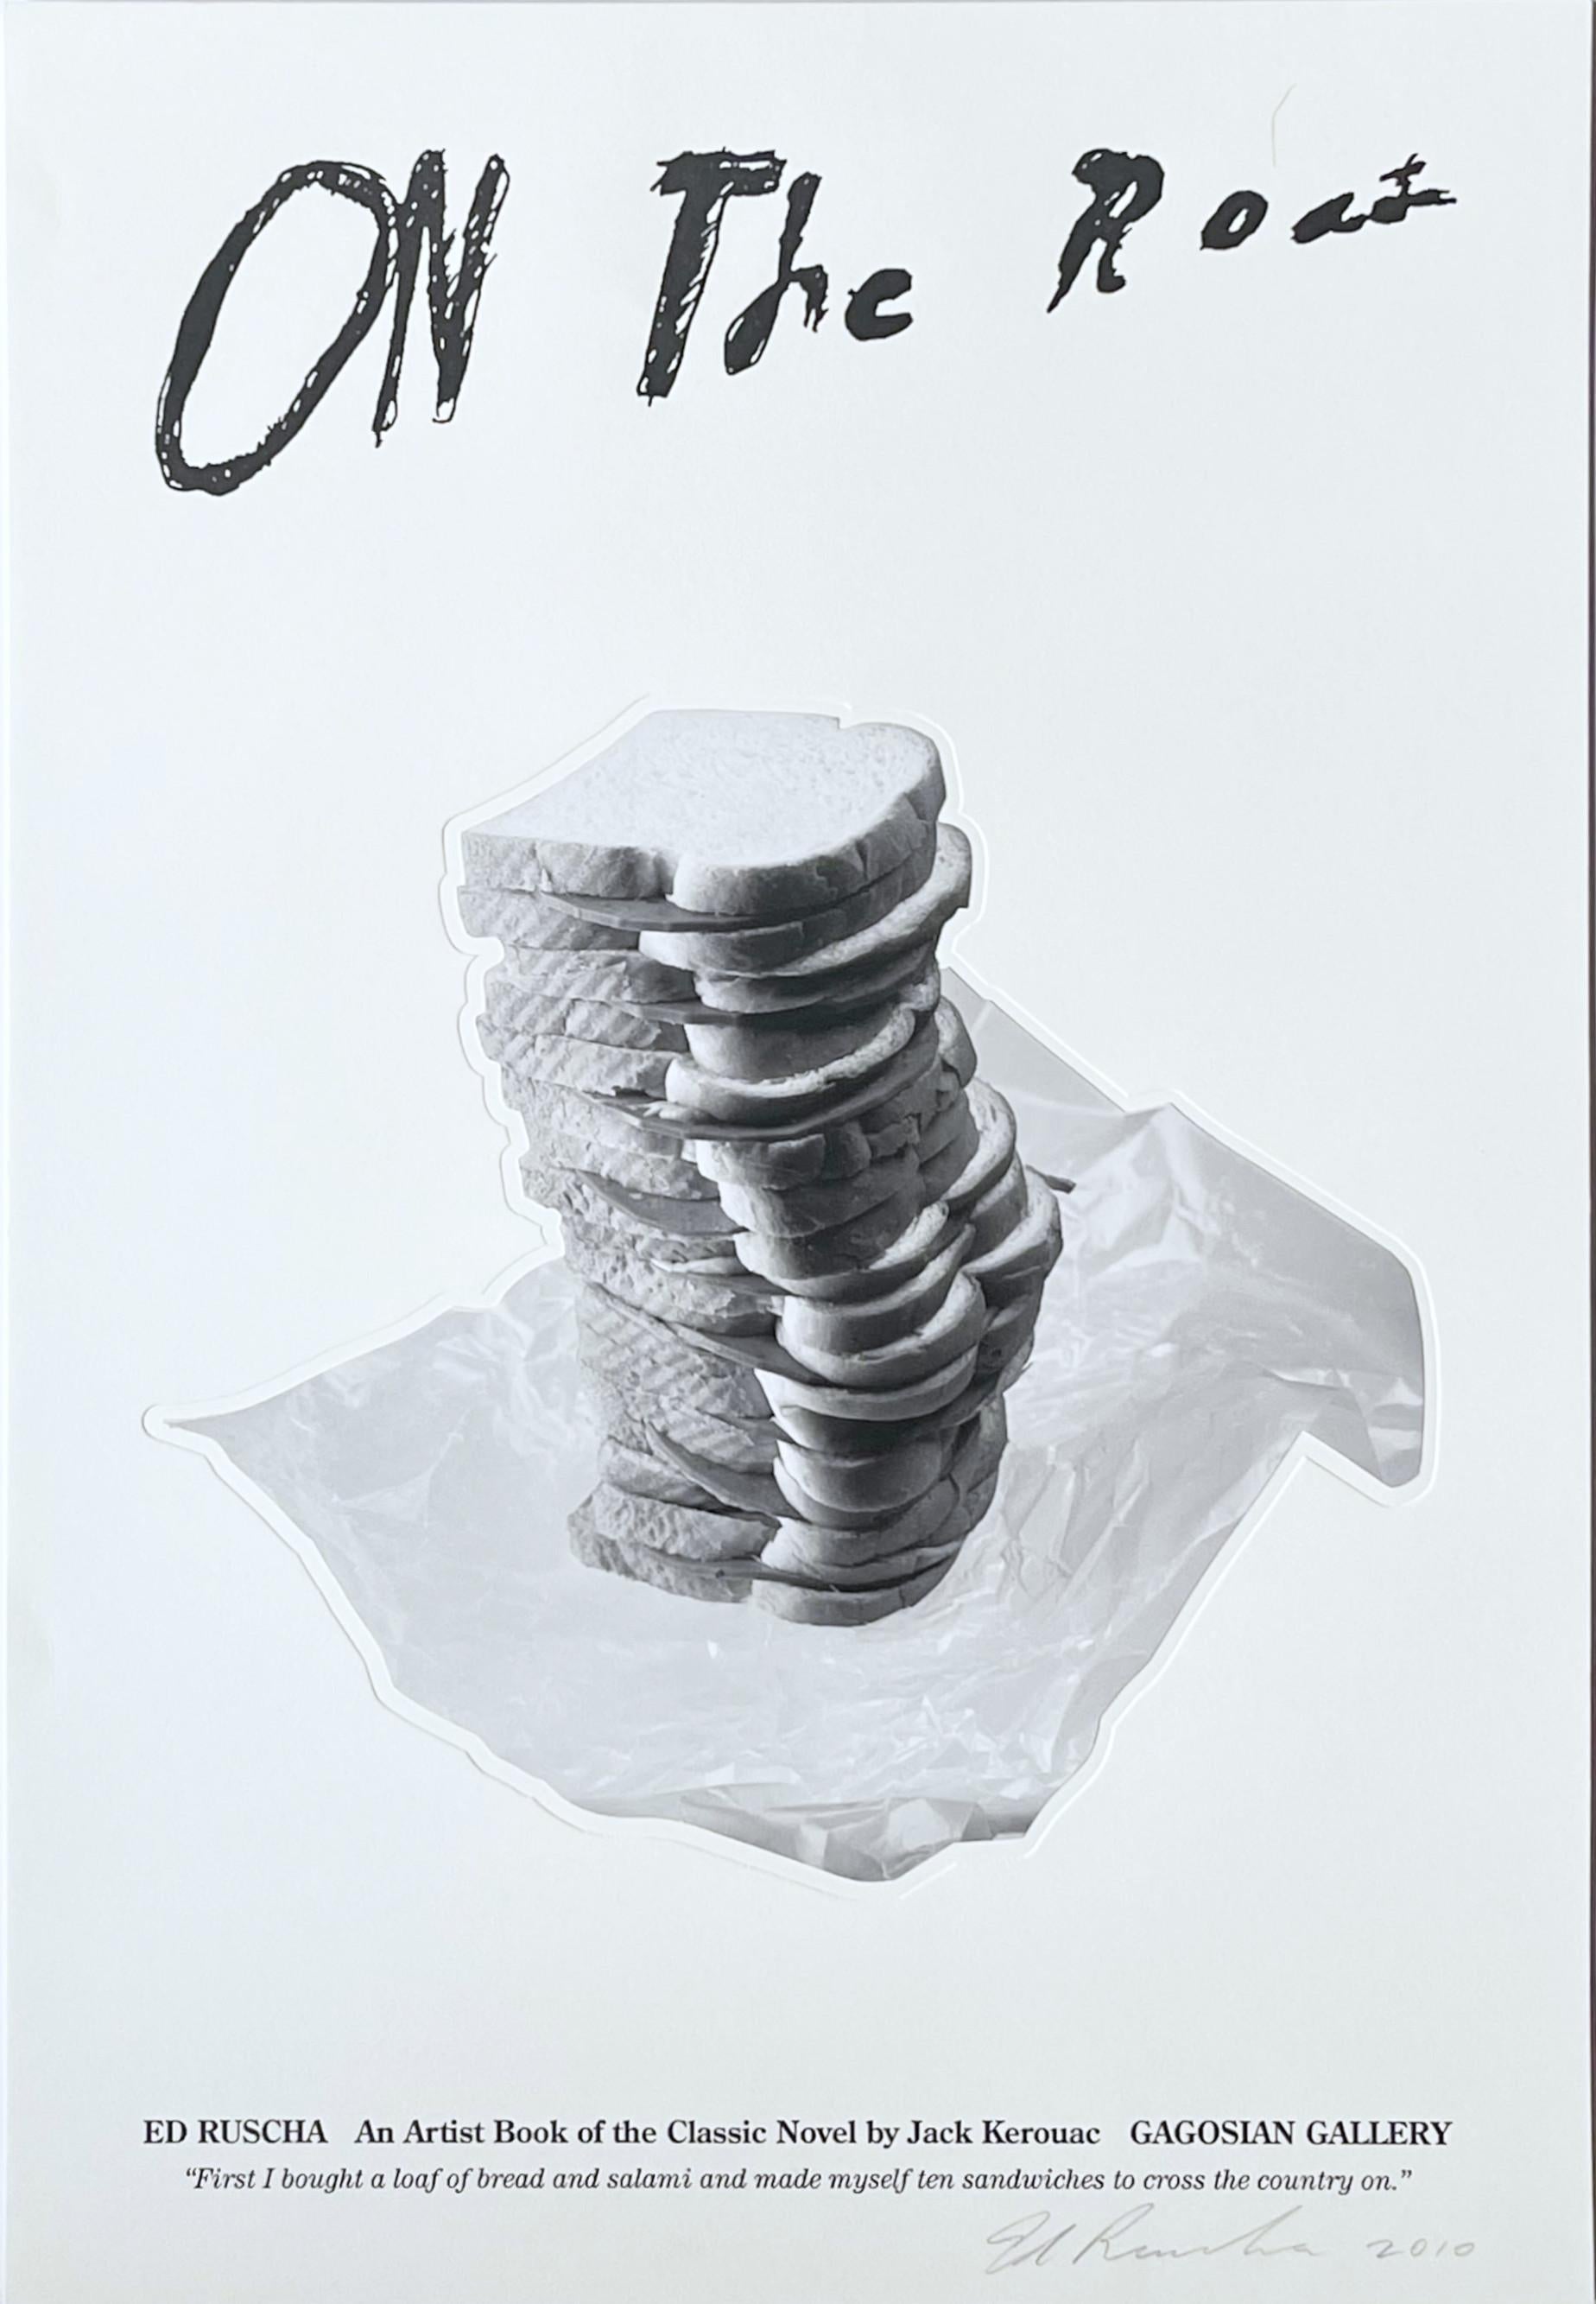 Ed Ruscha
On the Road (10 sandwiches with bread and salami) (Hand signed and dated by Ed Ruscha), 2010
Letterpress on paper with tipped-in die-cut photograph
Hand signed and dated 2010 by Ed Ruscha on the front, Edition of 100 (unnumbered)
26 × 18